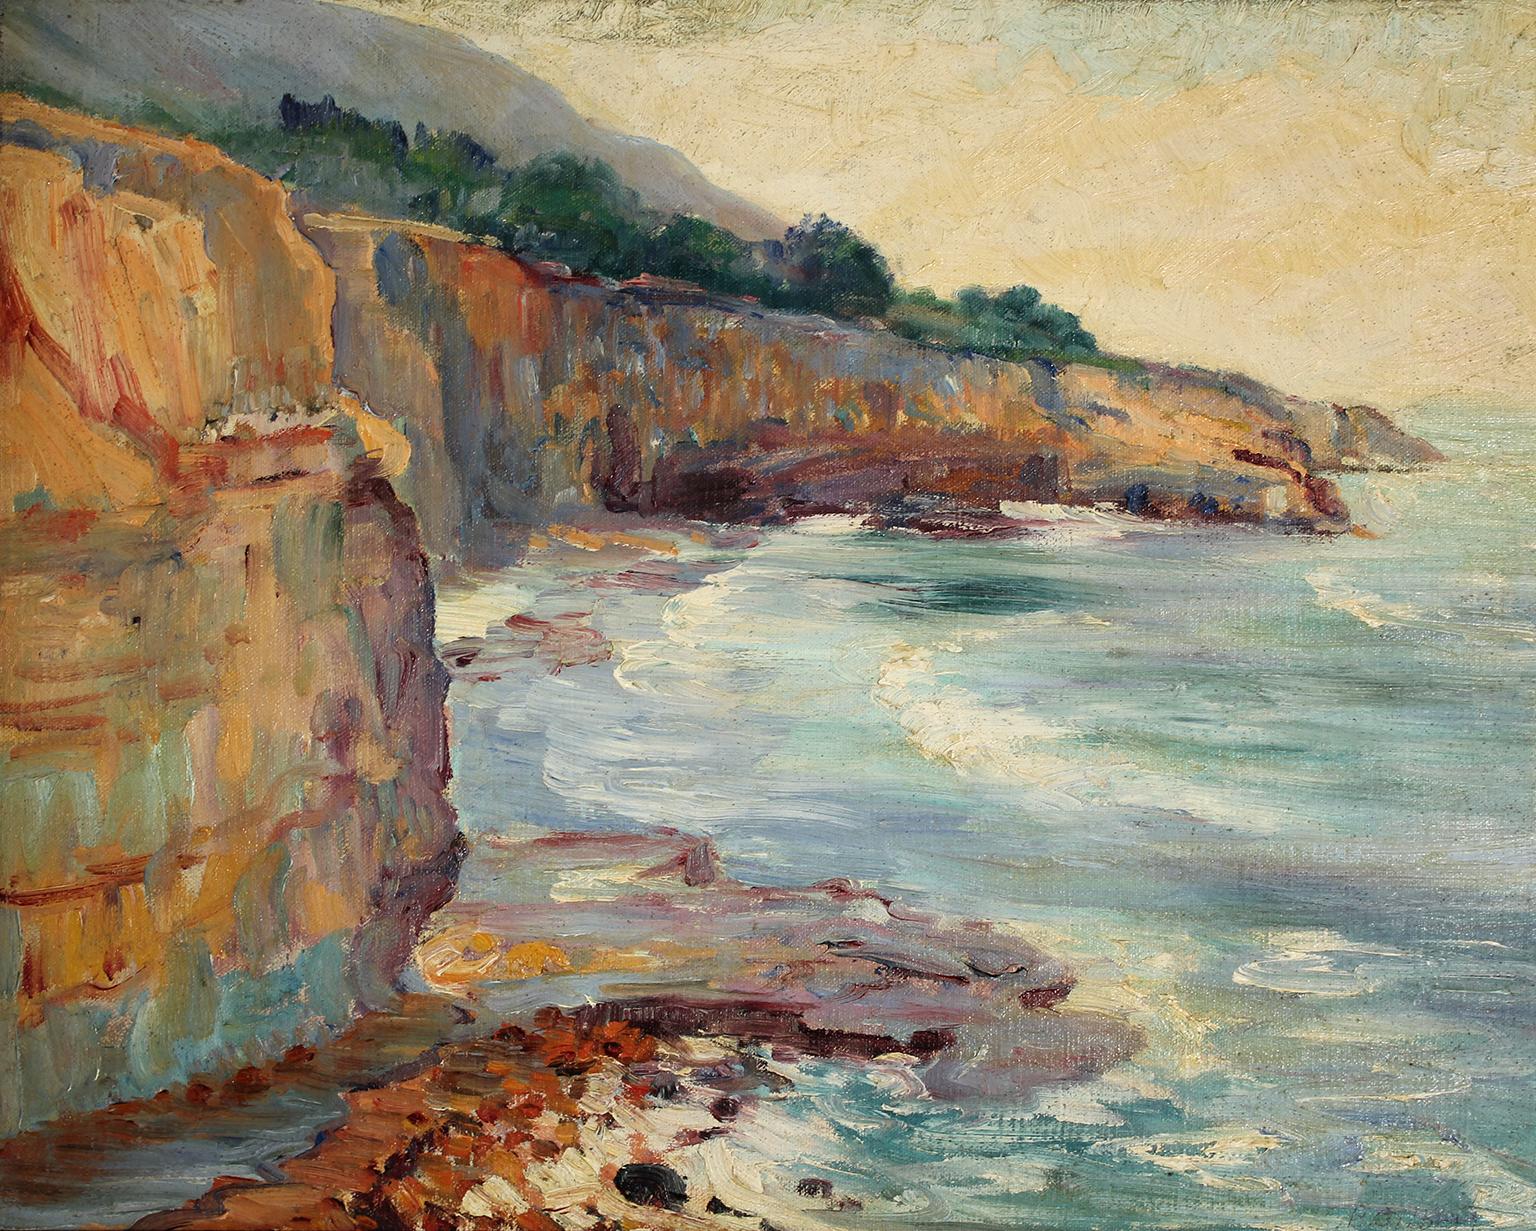 Beautiful plein air painting by listed San Diego impressionist artist Bess Gilbert. Dates from the 1930s and is of the ocean, beach and cliffs. Probably of Sunset Cliffs or Torrey Pines very extensive bio online about the artist and her rich San